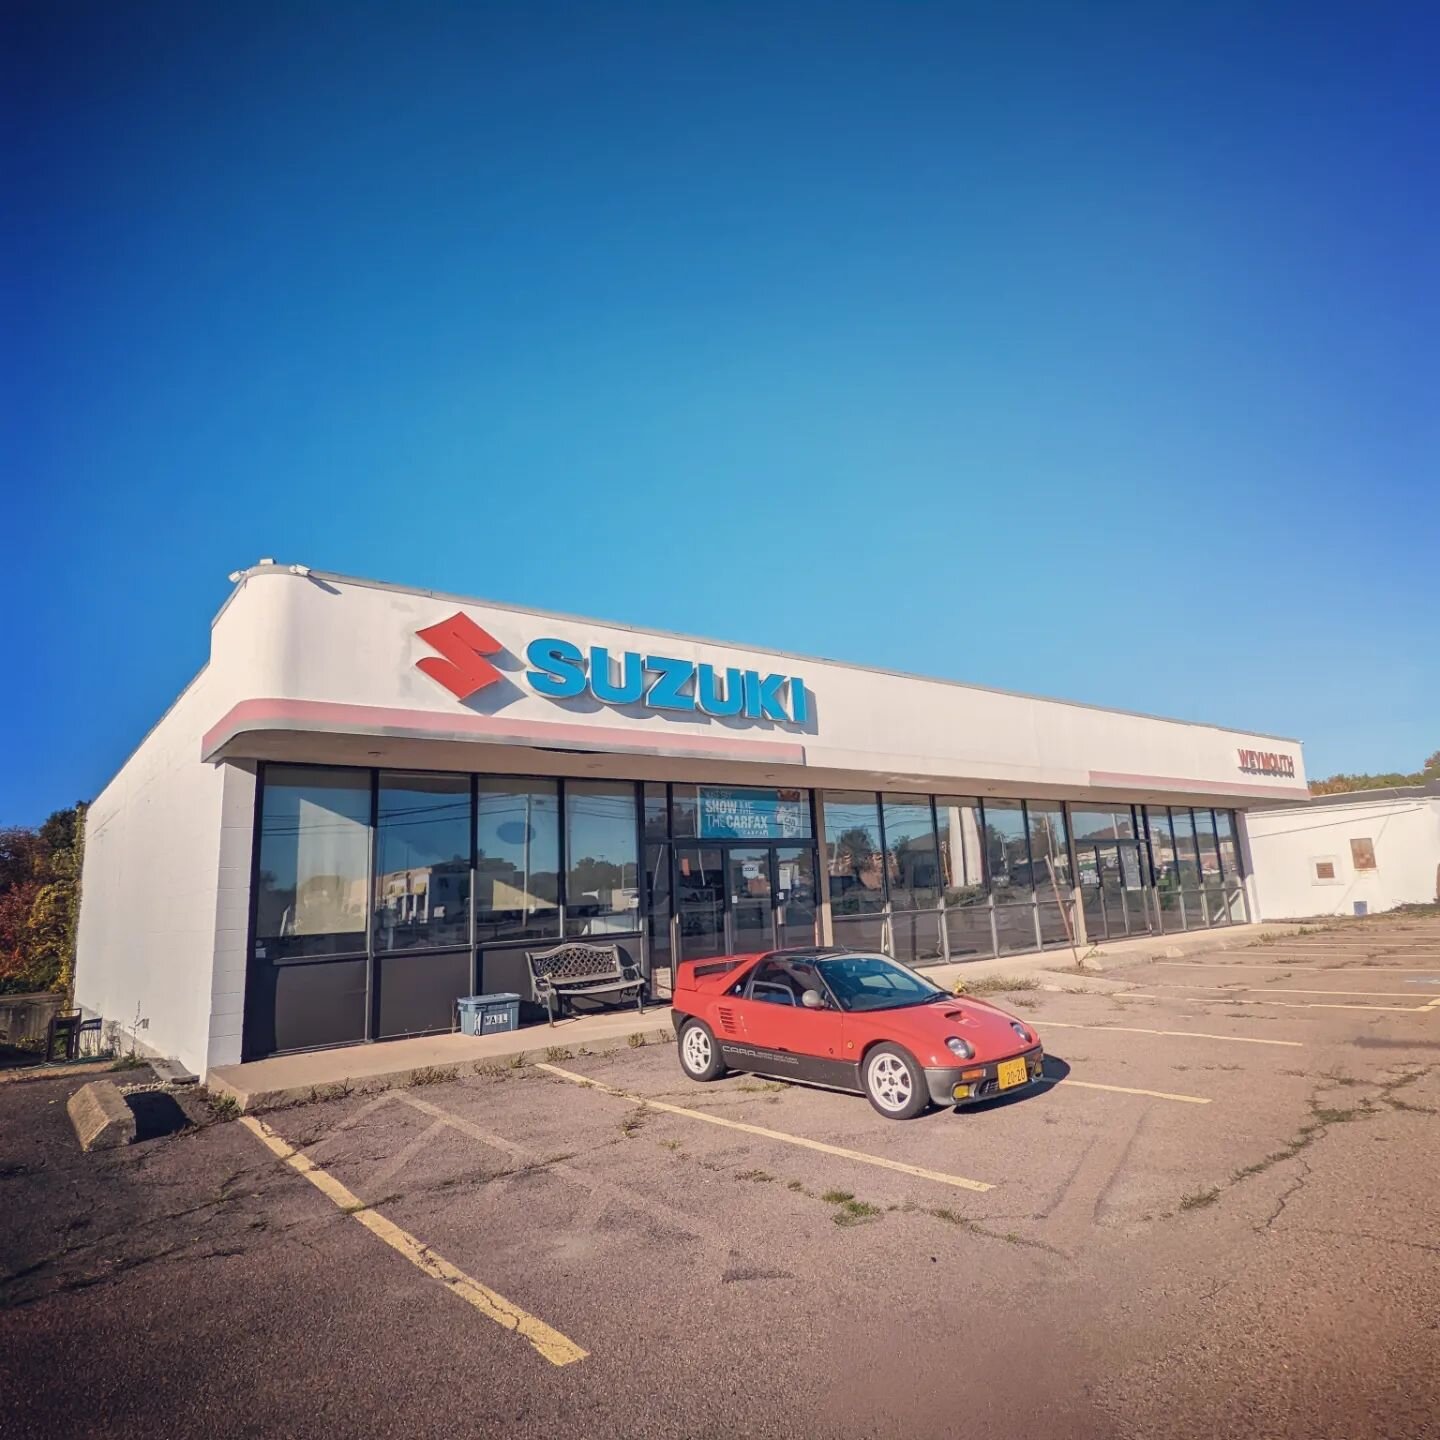 Realized there was an old decrepit Suzuki dealer building near by that still has its signage up. Stopped by for a few quick photos with my Suzuki Cara.

#suzuki #suzukicara #pg6ss #pg6sa #autozam #autozamaz1 #jdm #jdmcars #jdmcar #carlife #car #aband